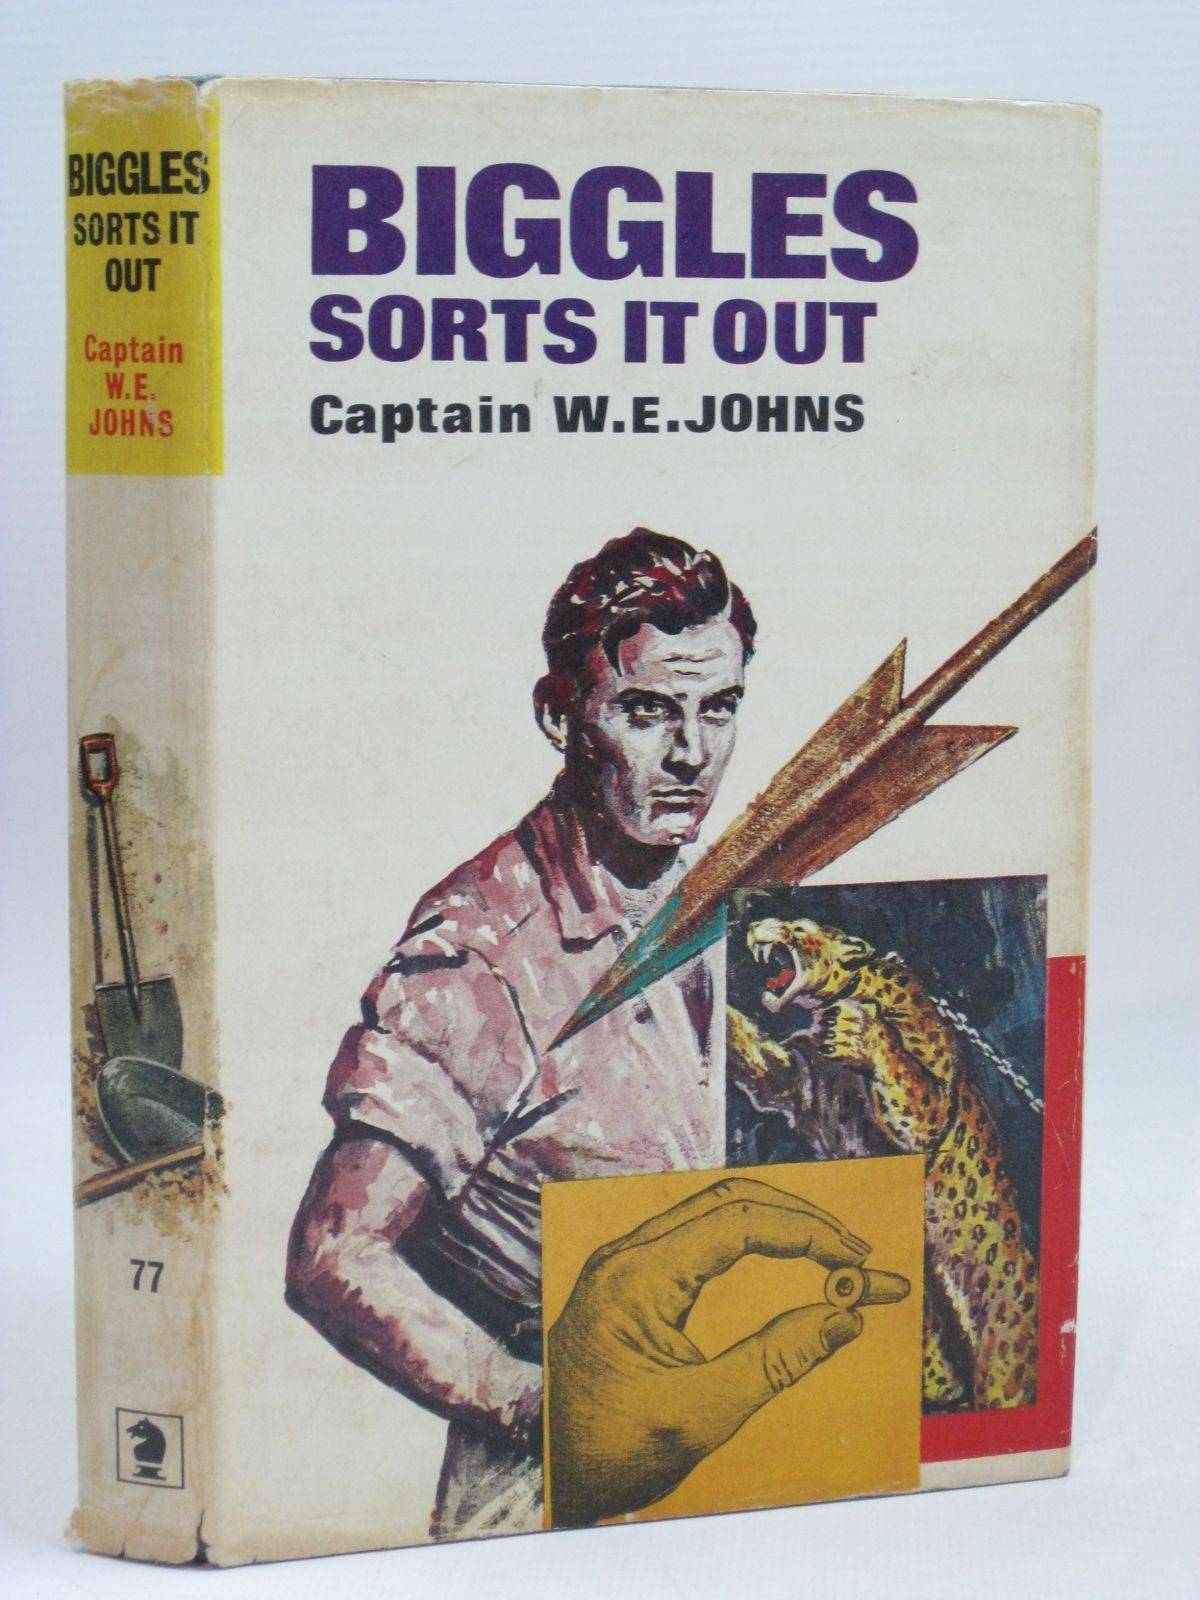 Cover of BIGGLES SORTS IT OUT by W.E. Johns